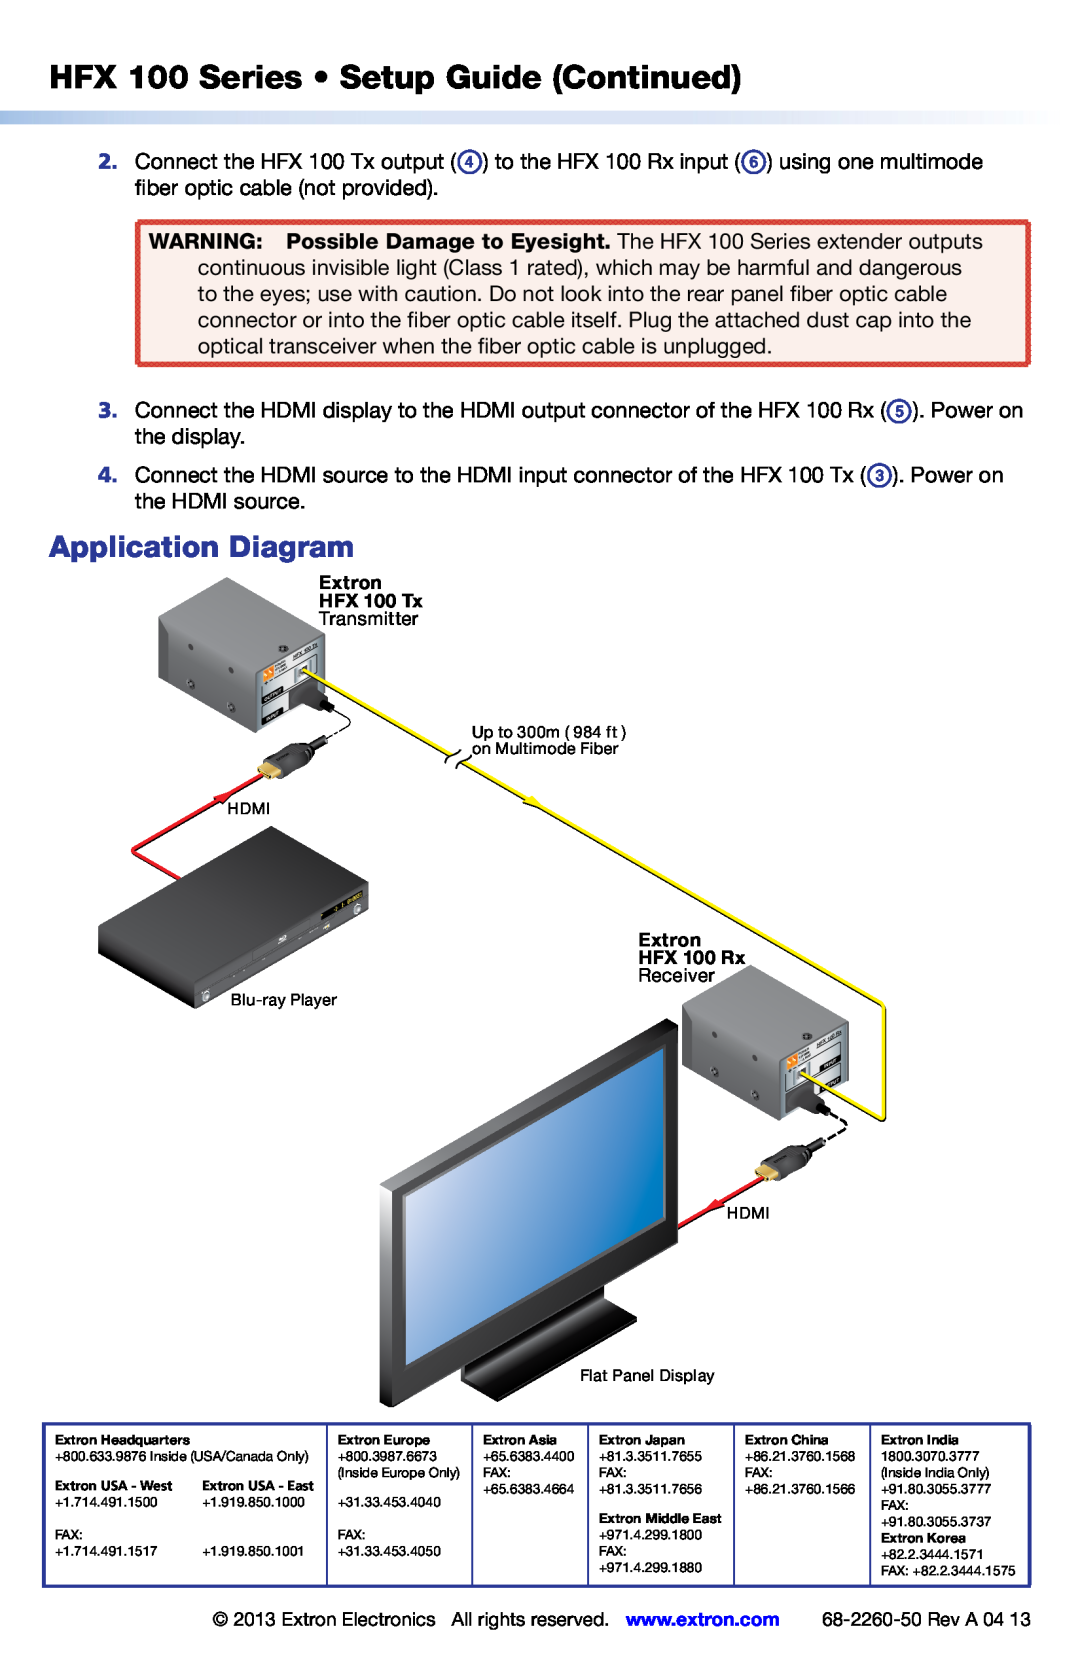 Extron electronic HFX 100 RX setup guide HFX 100 Series Setup Guide Continued, Application Diagram 